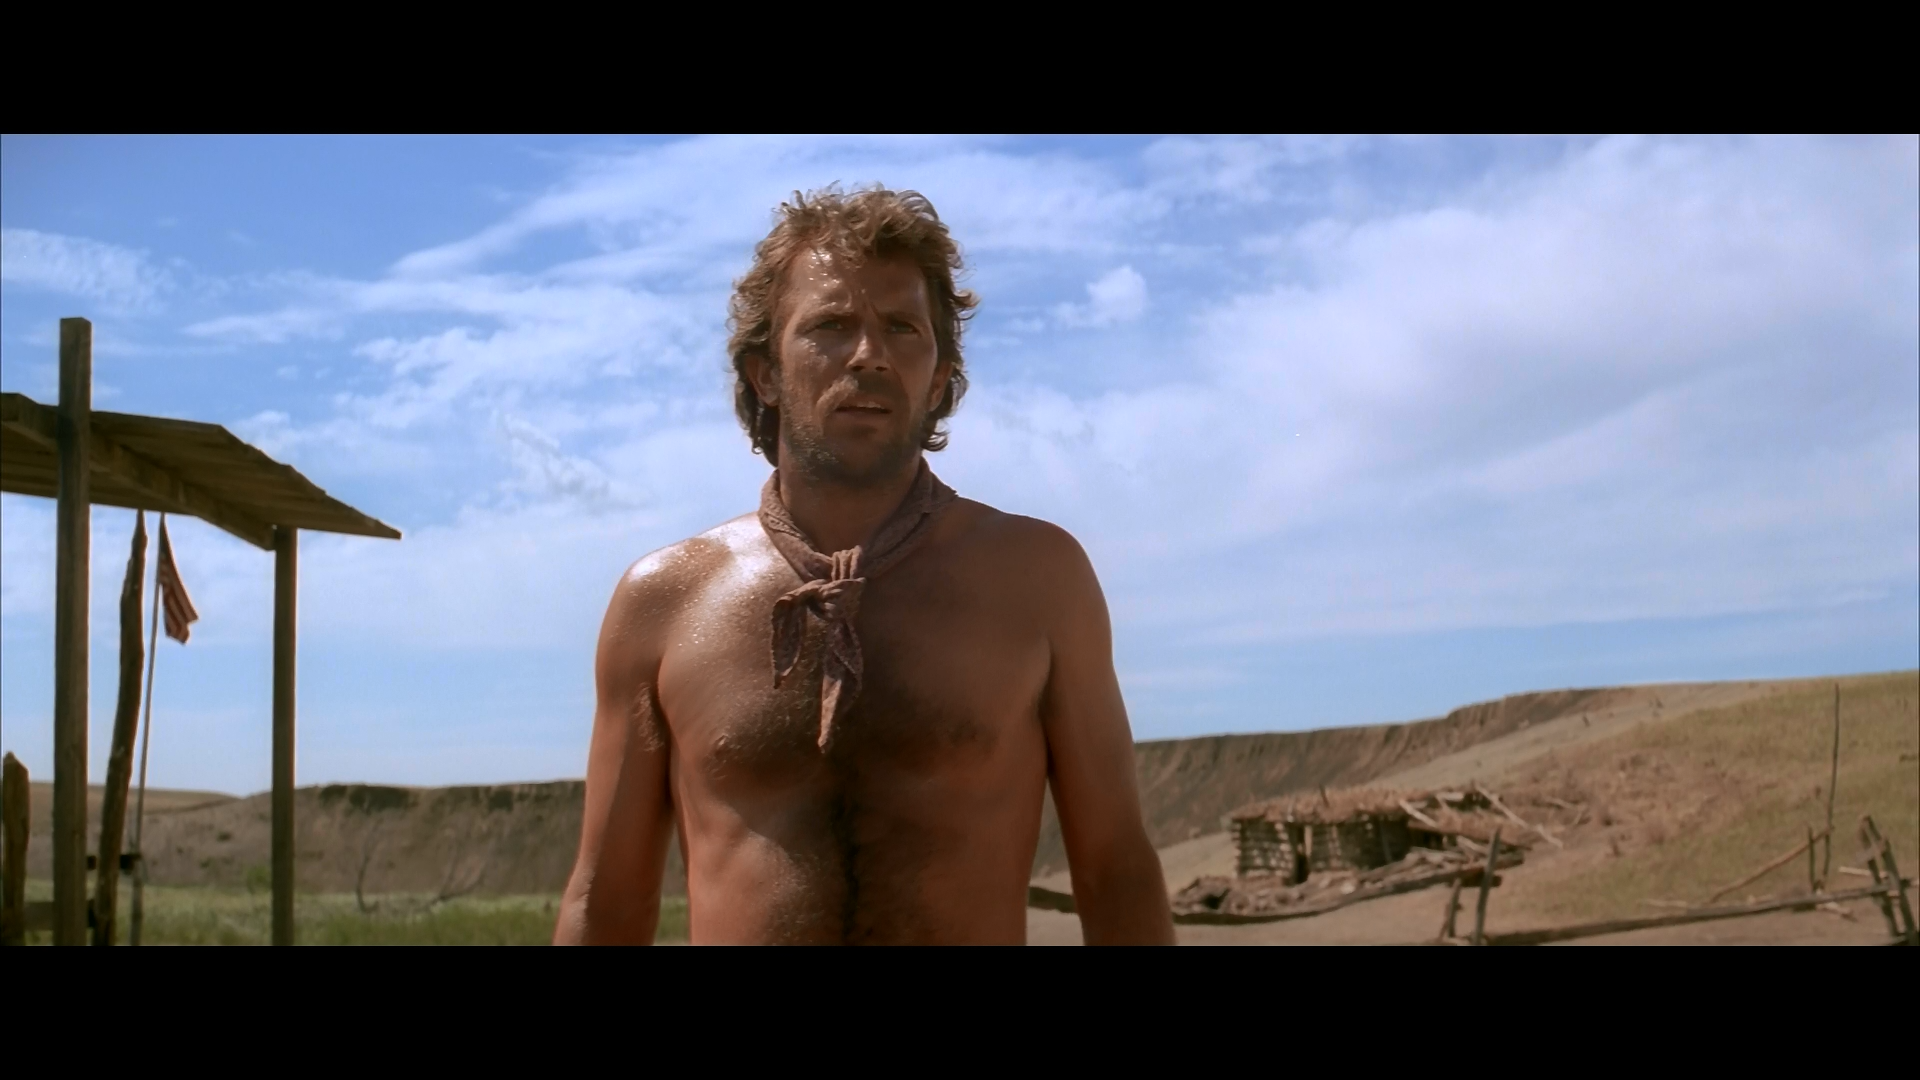 Dances with wolves nude.